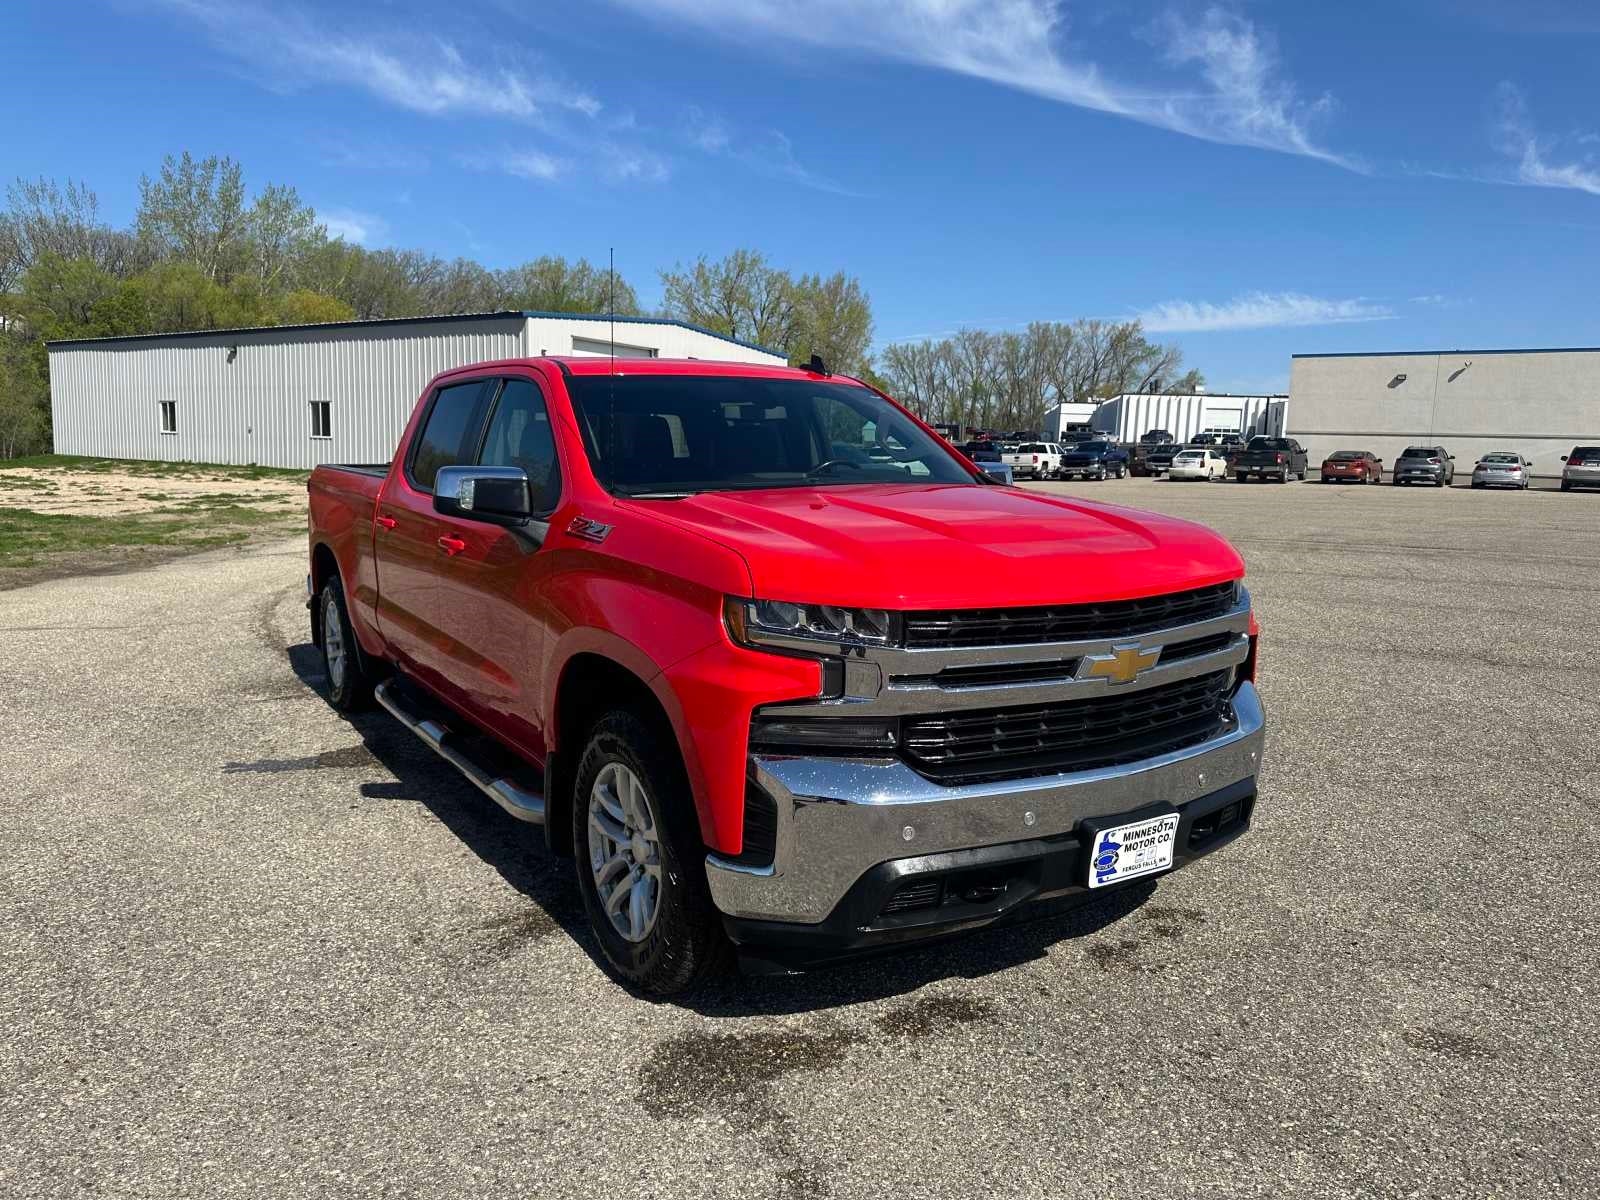 Used 2019 Chevrolet Silverado 1500 LT with VIN 1GCUYDED1KZ285660 for sale in Fergus Falls, Minnesota